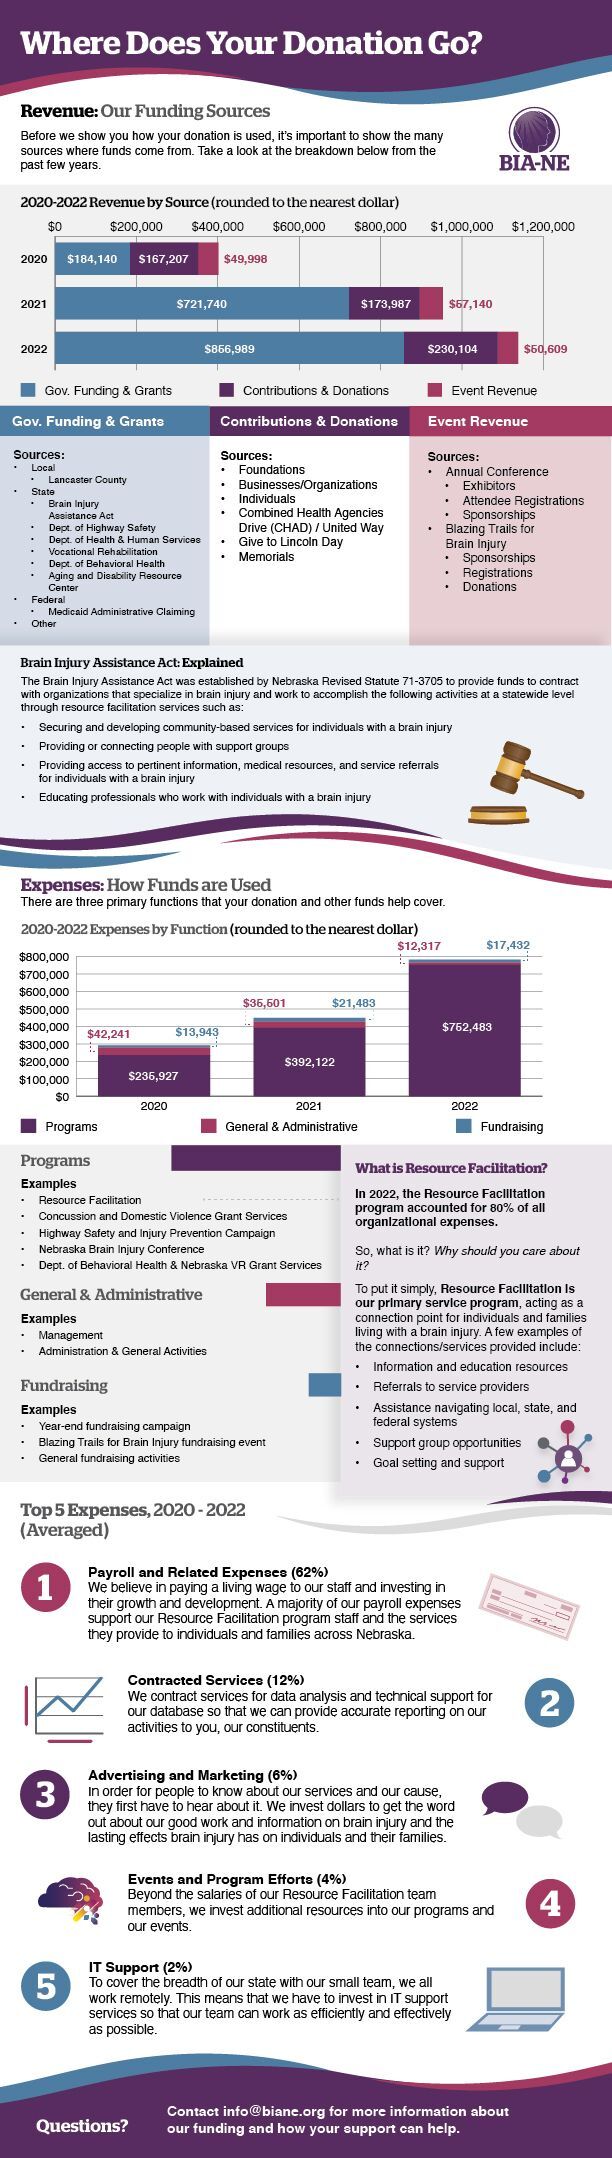 Image of an infographic showing the primary revenue sources and expenses of the Brain Injury Alliance of Nebraska for 2020-2022.